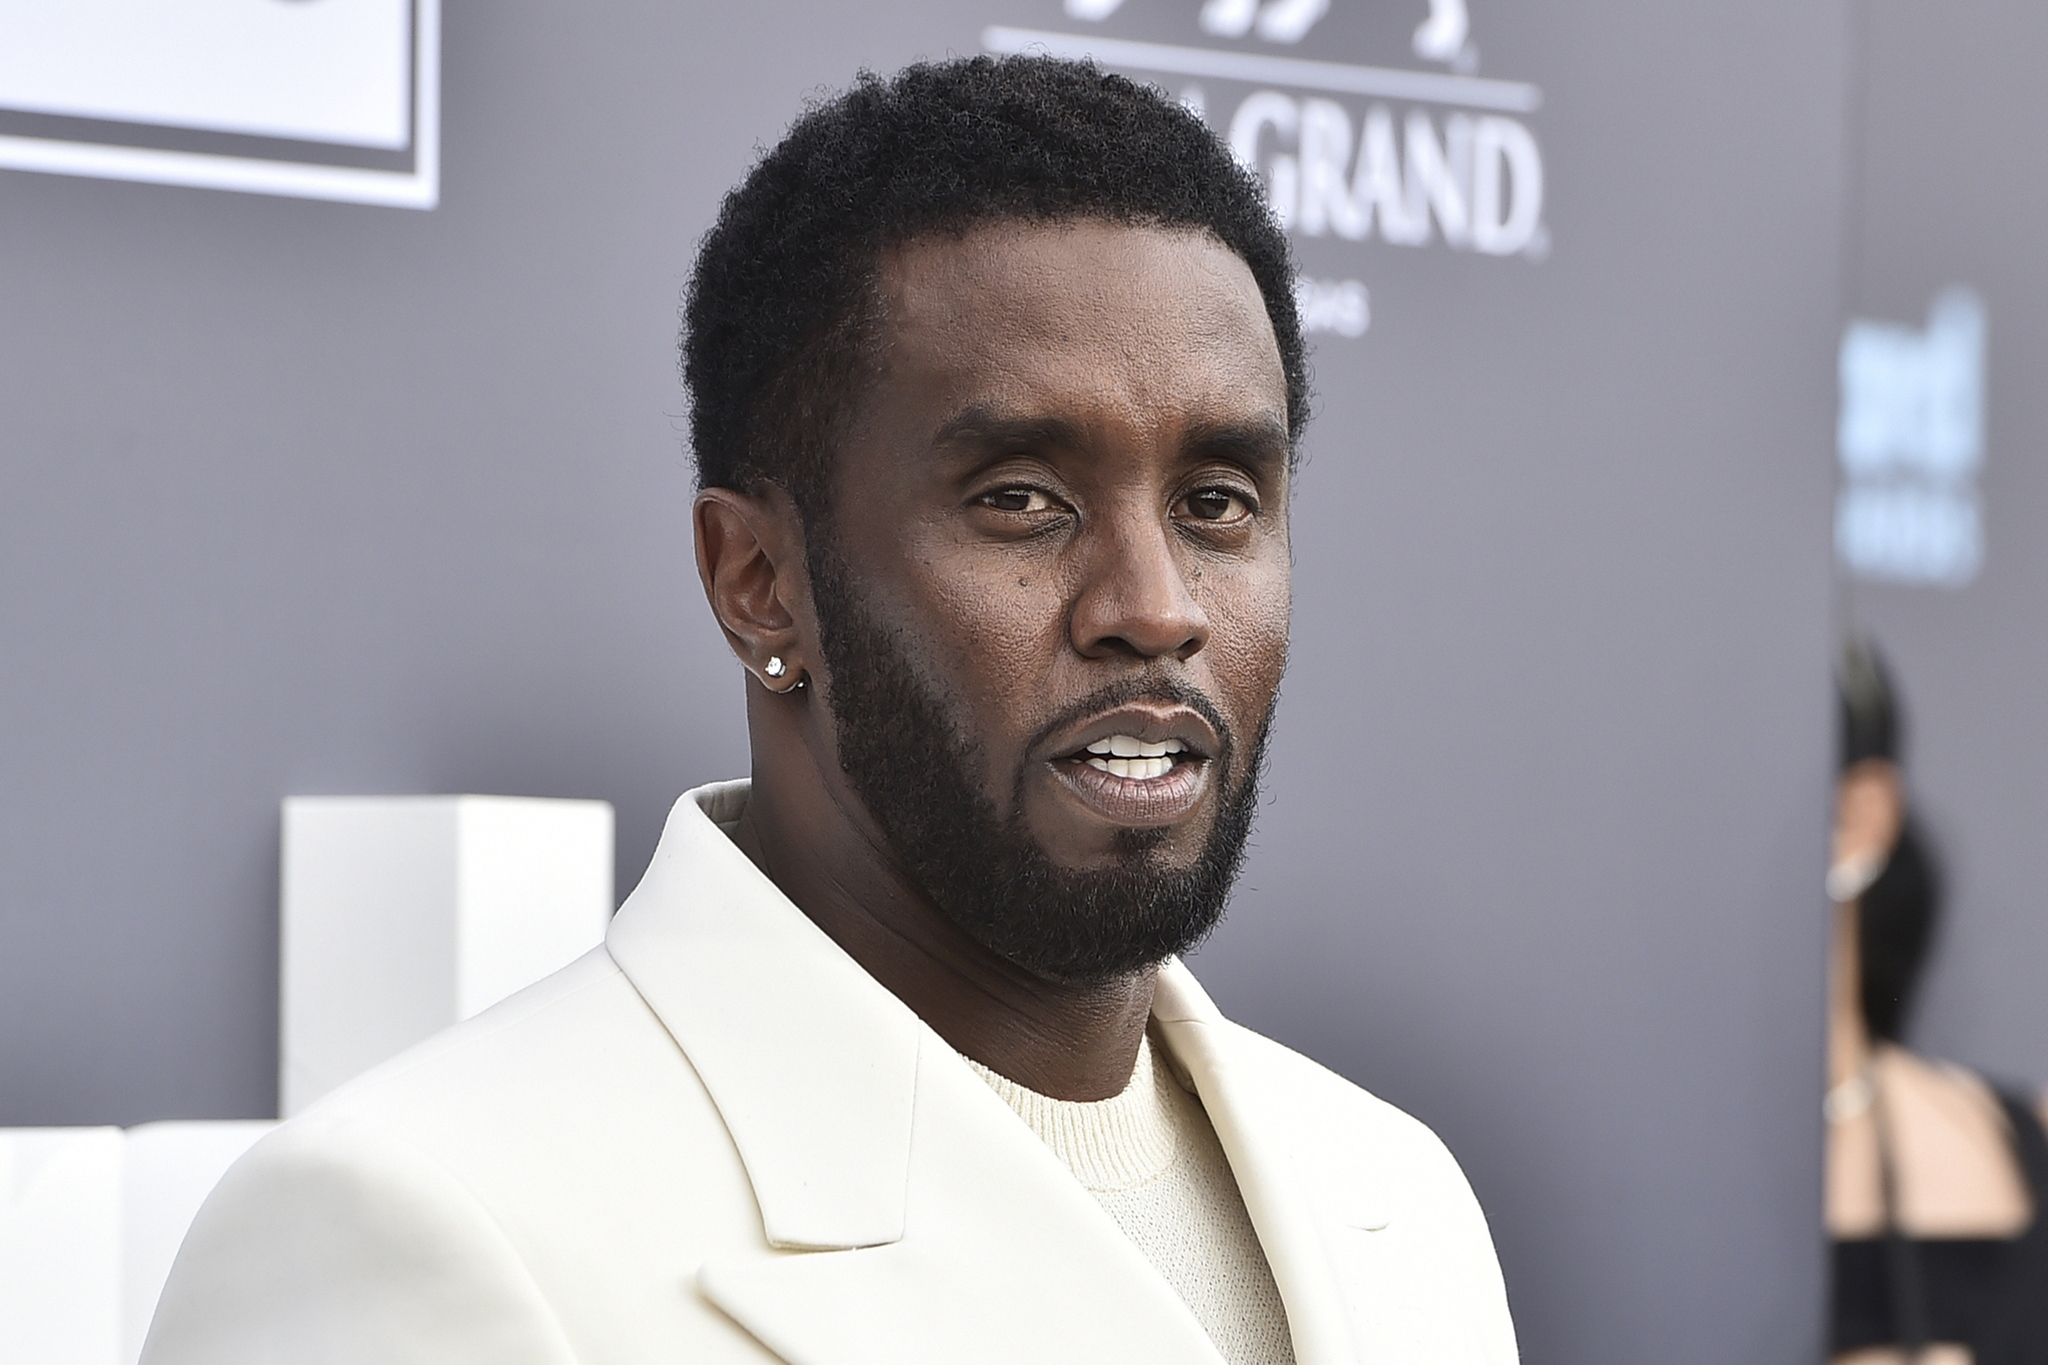 Diddy arrives at the Billboard Music Awards